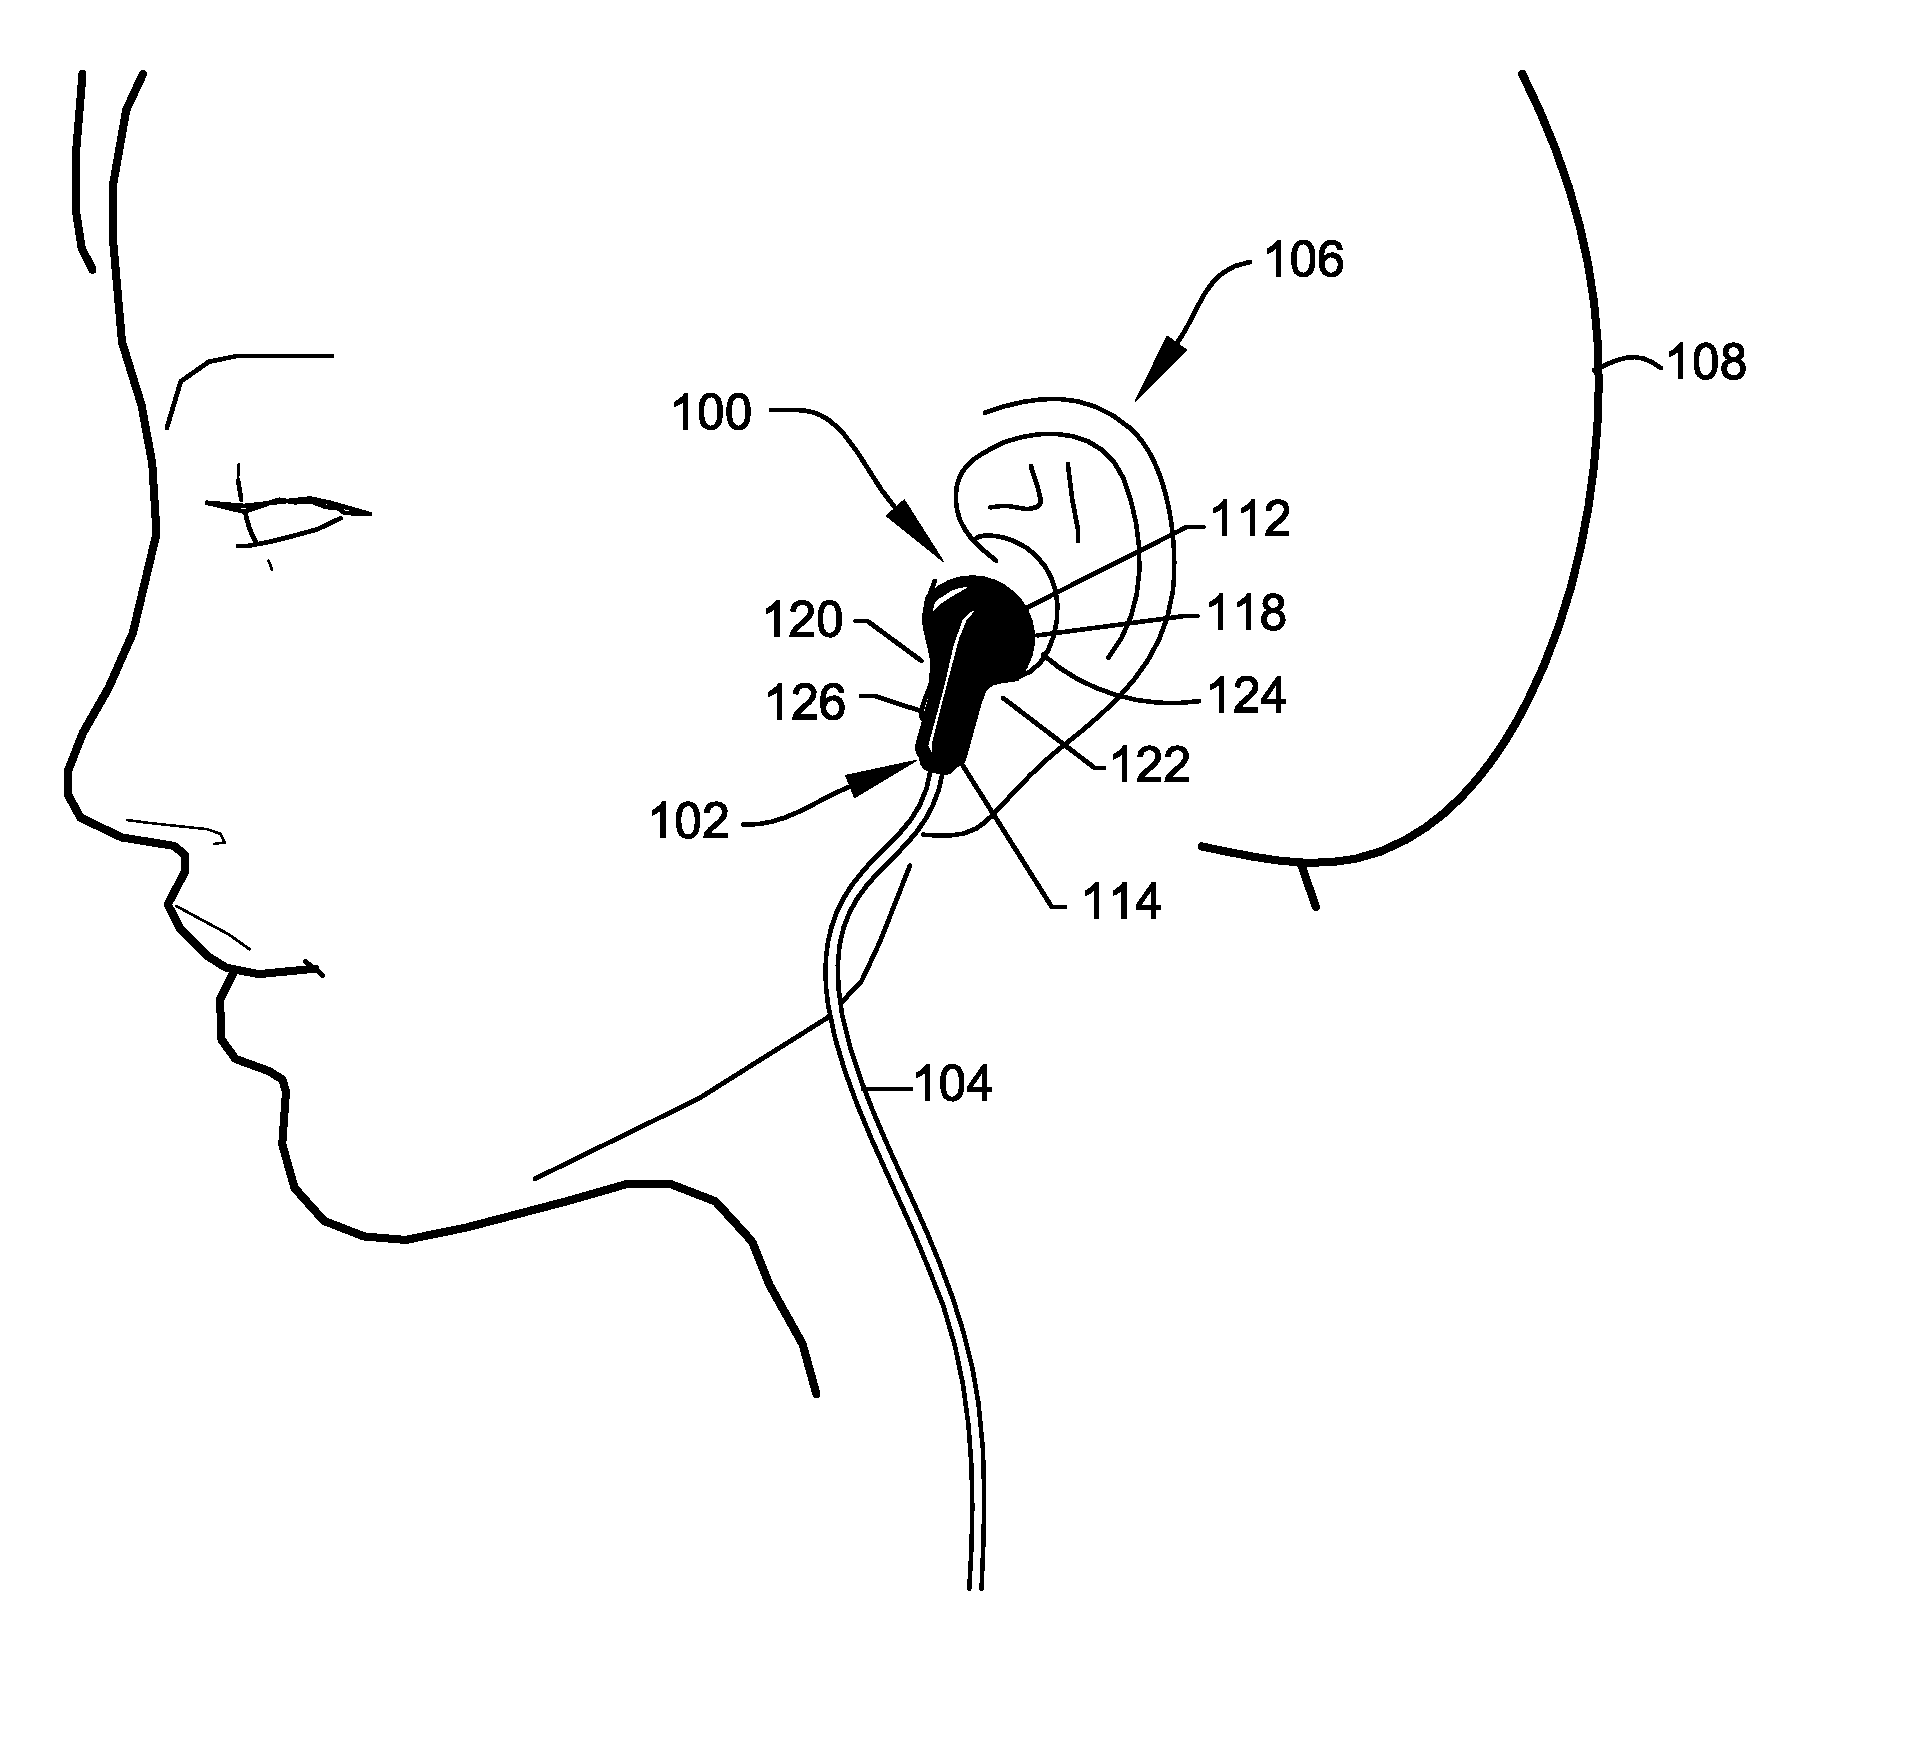 Earbud Protection Systems